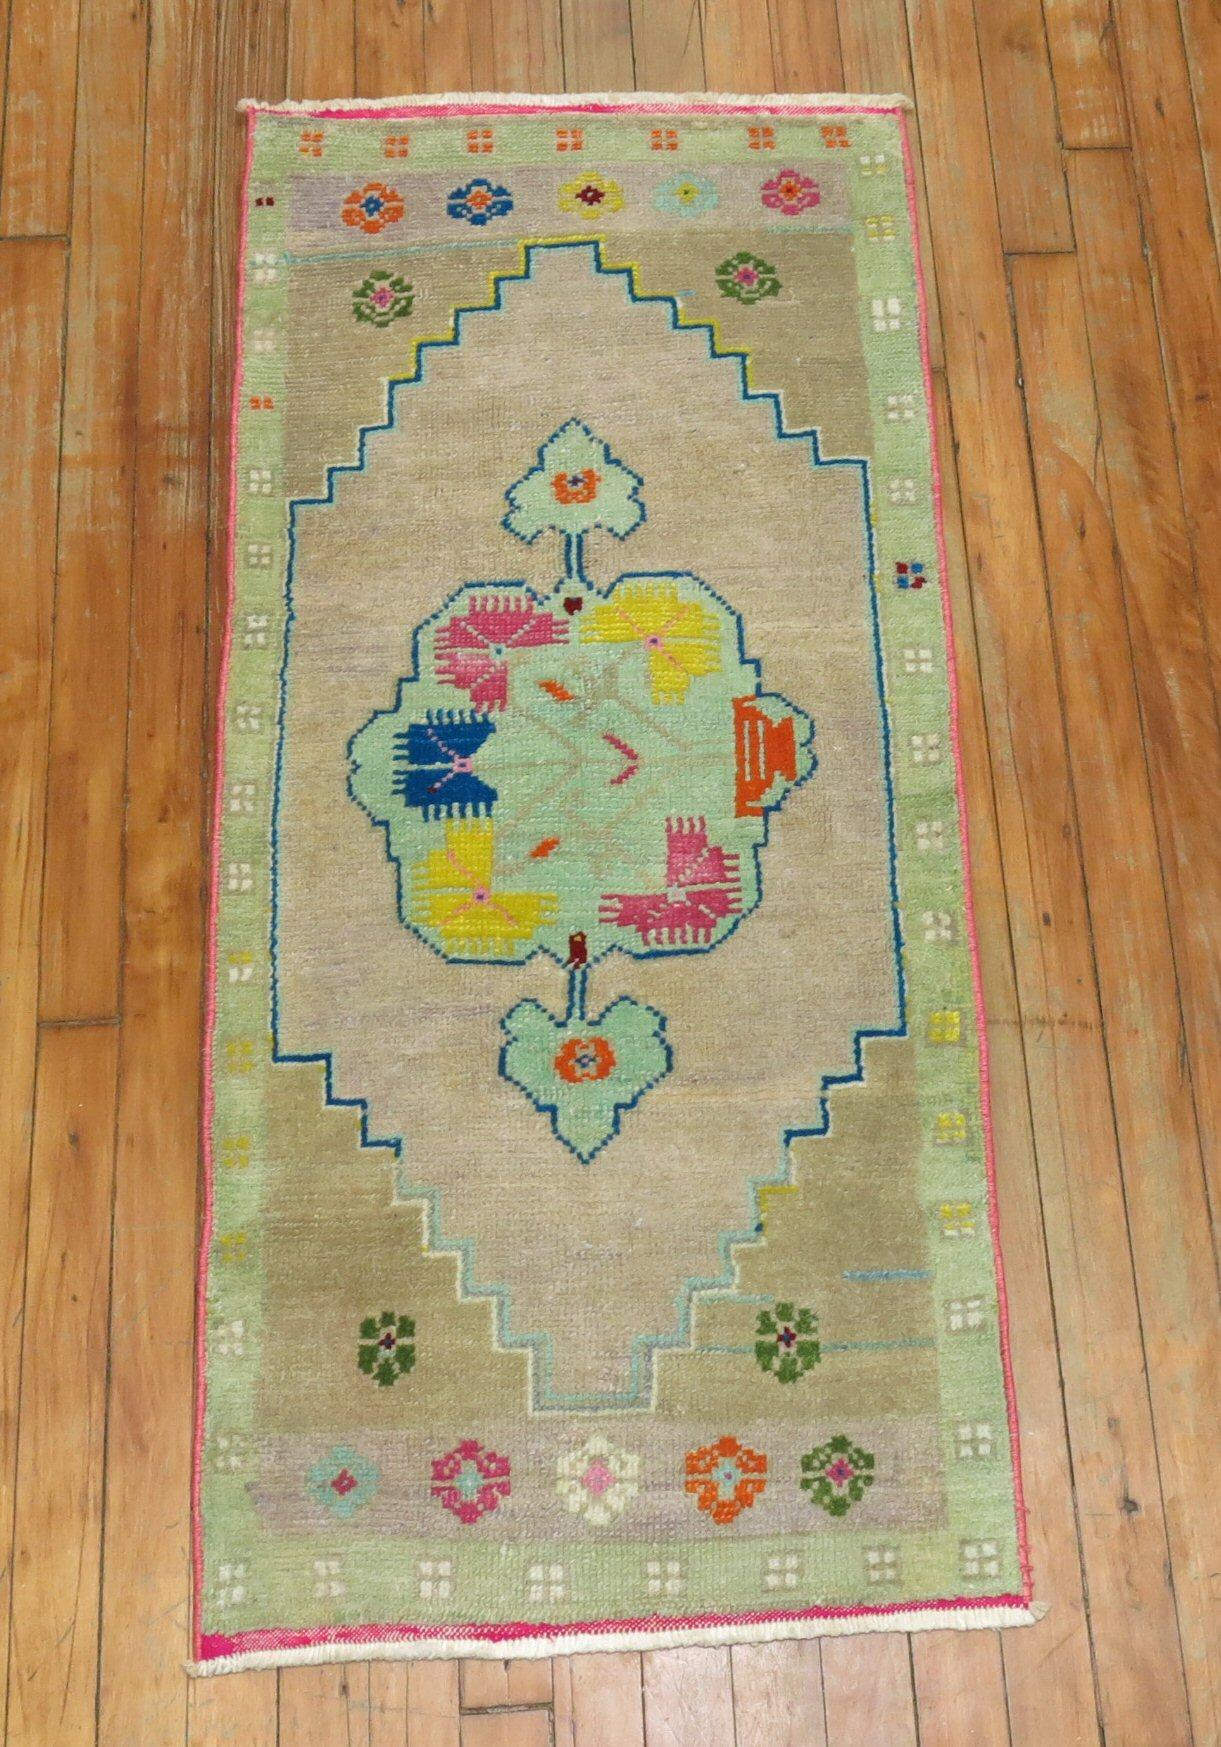 One of a kind vintage Turkish mat from the 20th century. All you got to do is look at the colors!

Size: 1'10” x 3'10”.